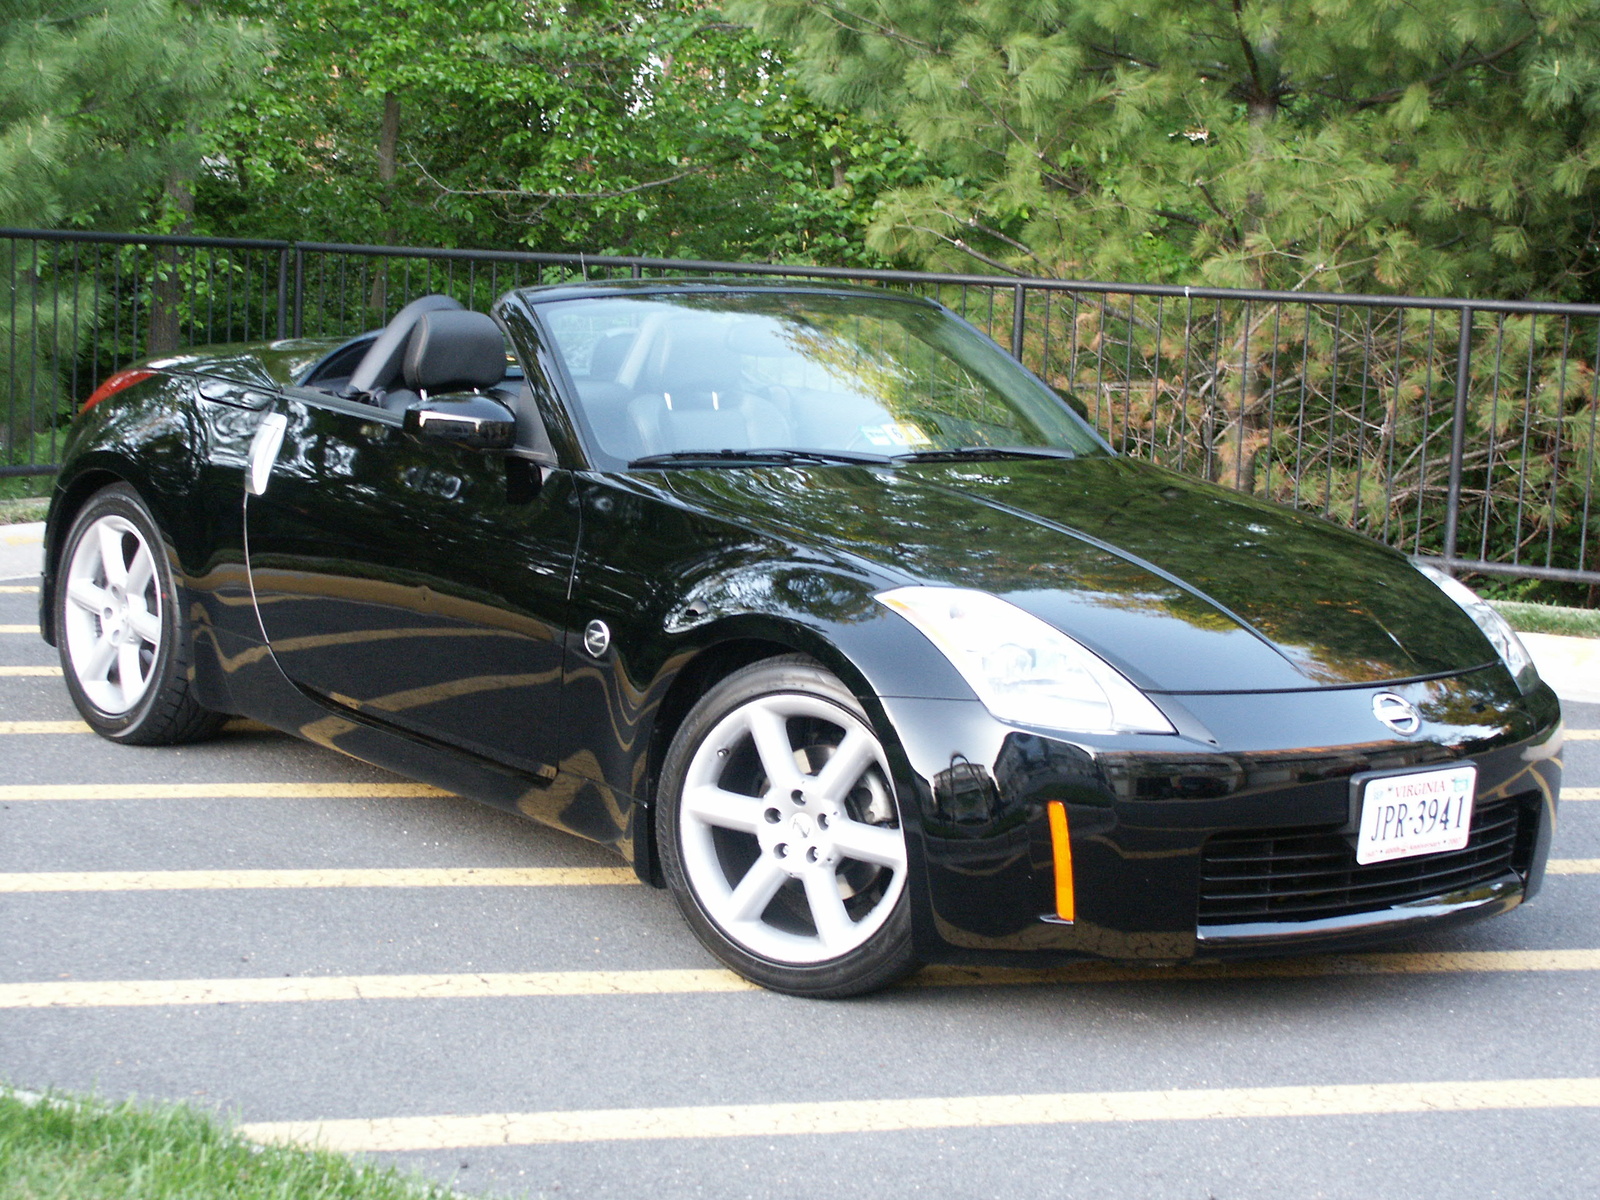 2004 Nissan 350z touring roadster reviews #5